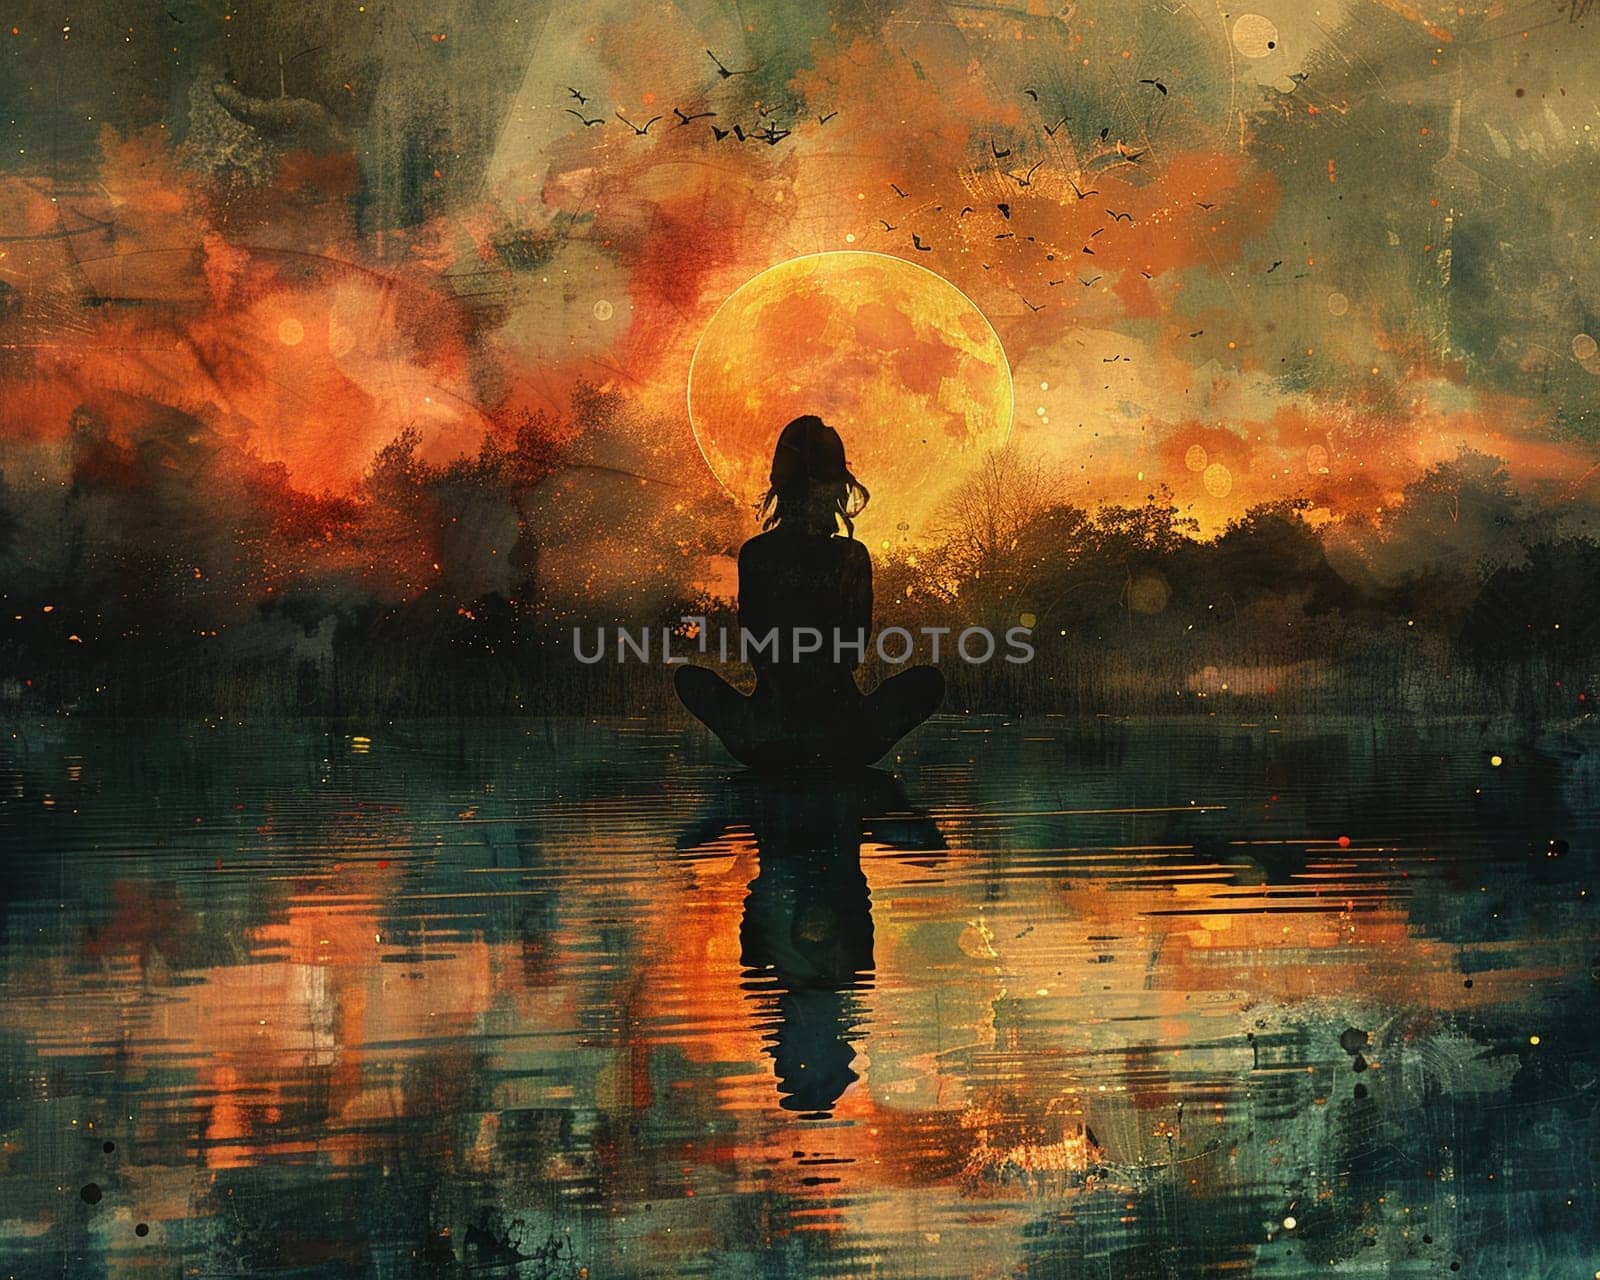 Digital art piece of people around globe turning off lights for EarthSerene painting of woman practicing yoga by lake at dawn, celebrating Women's Day.